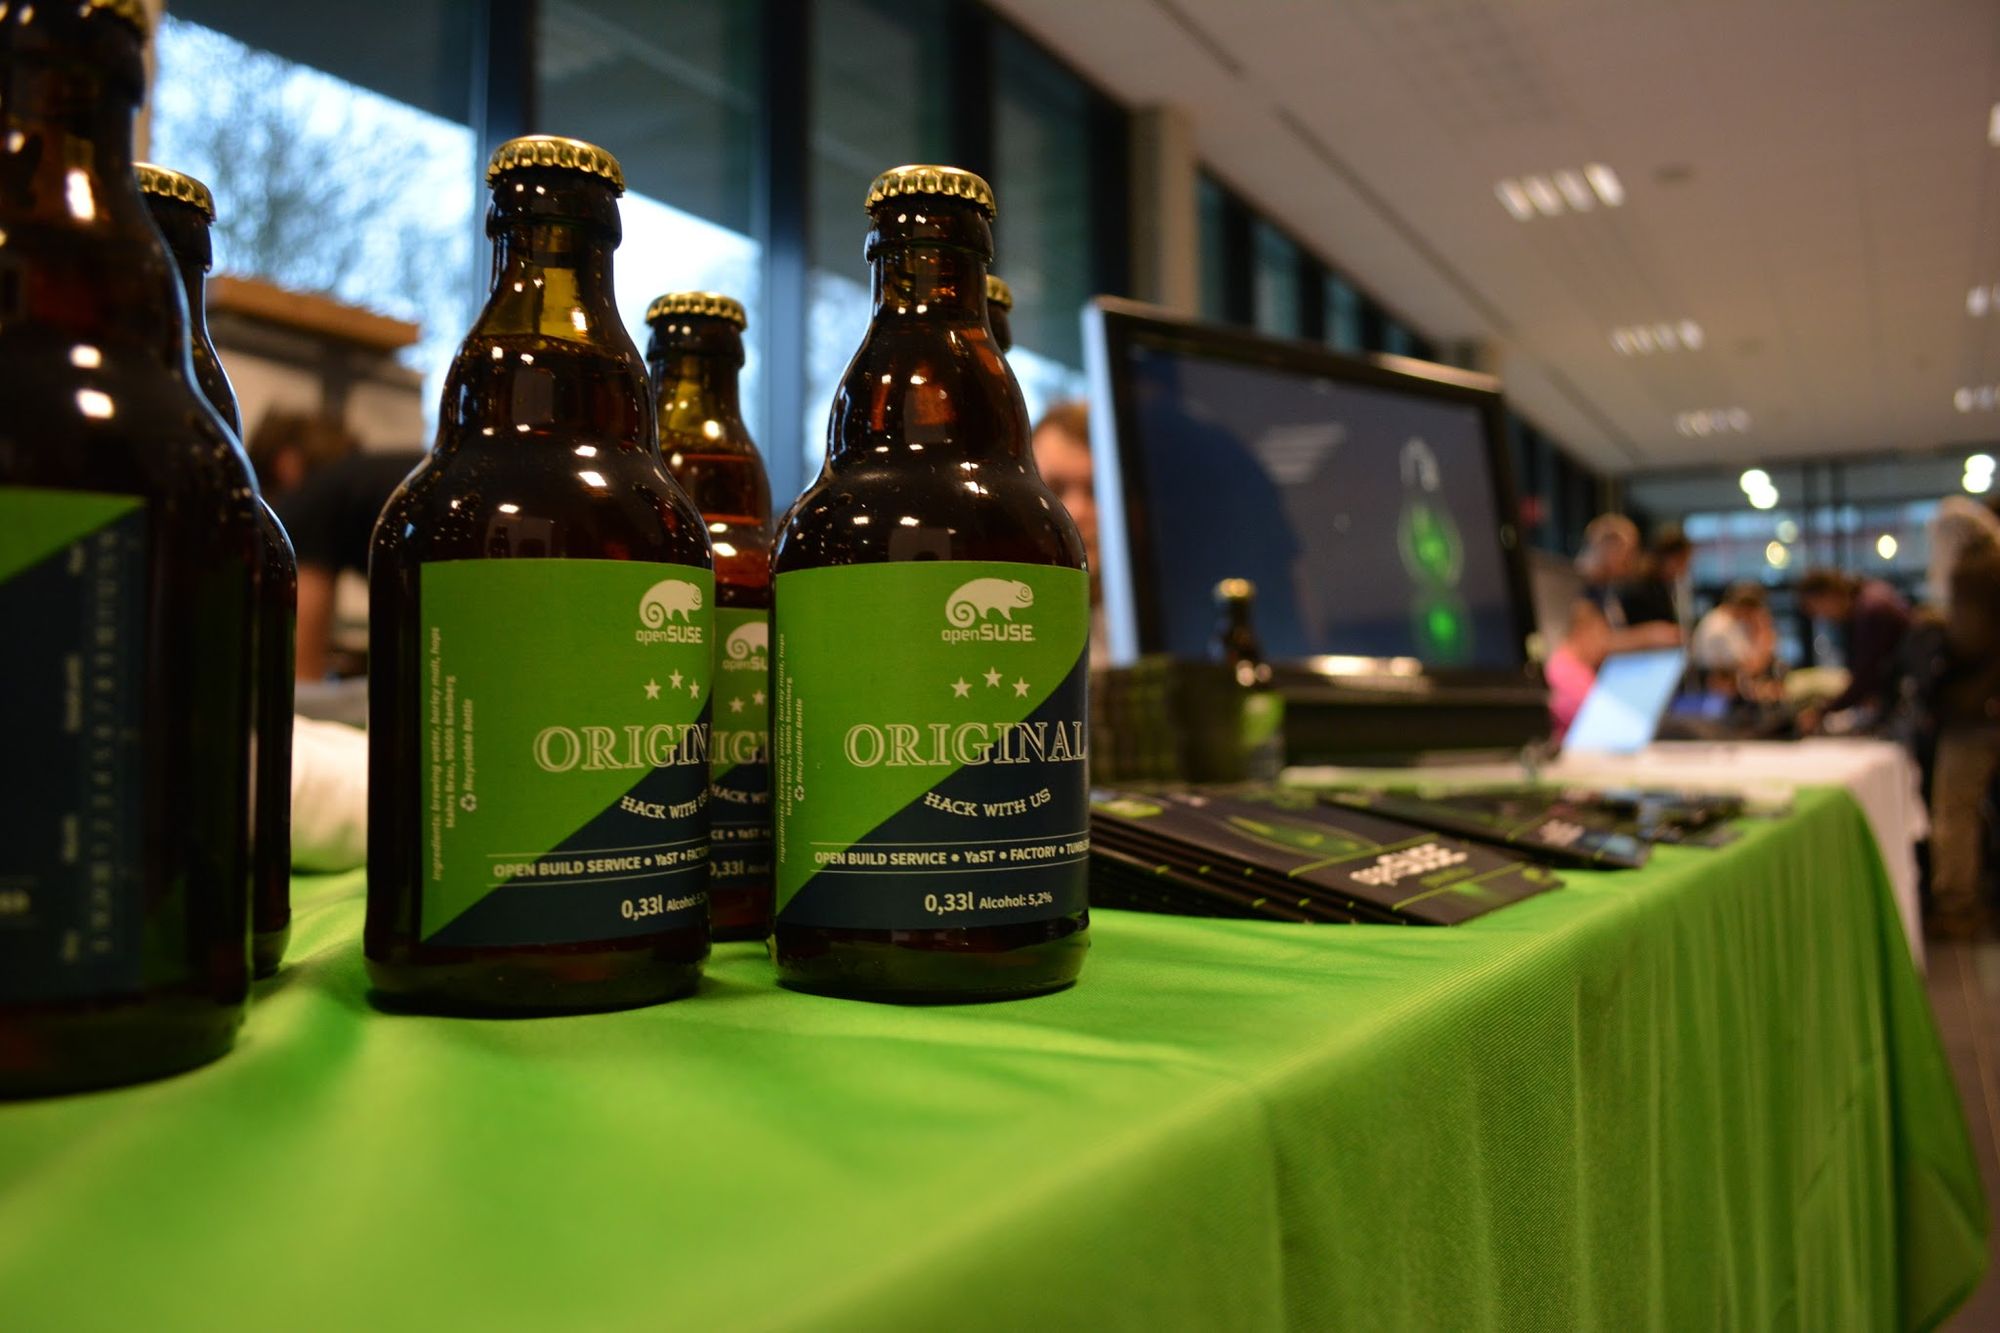 openSUSE beer